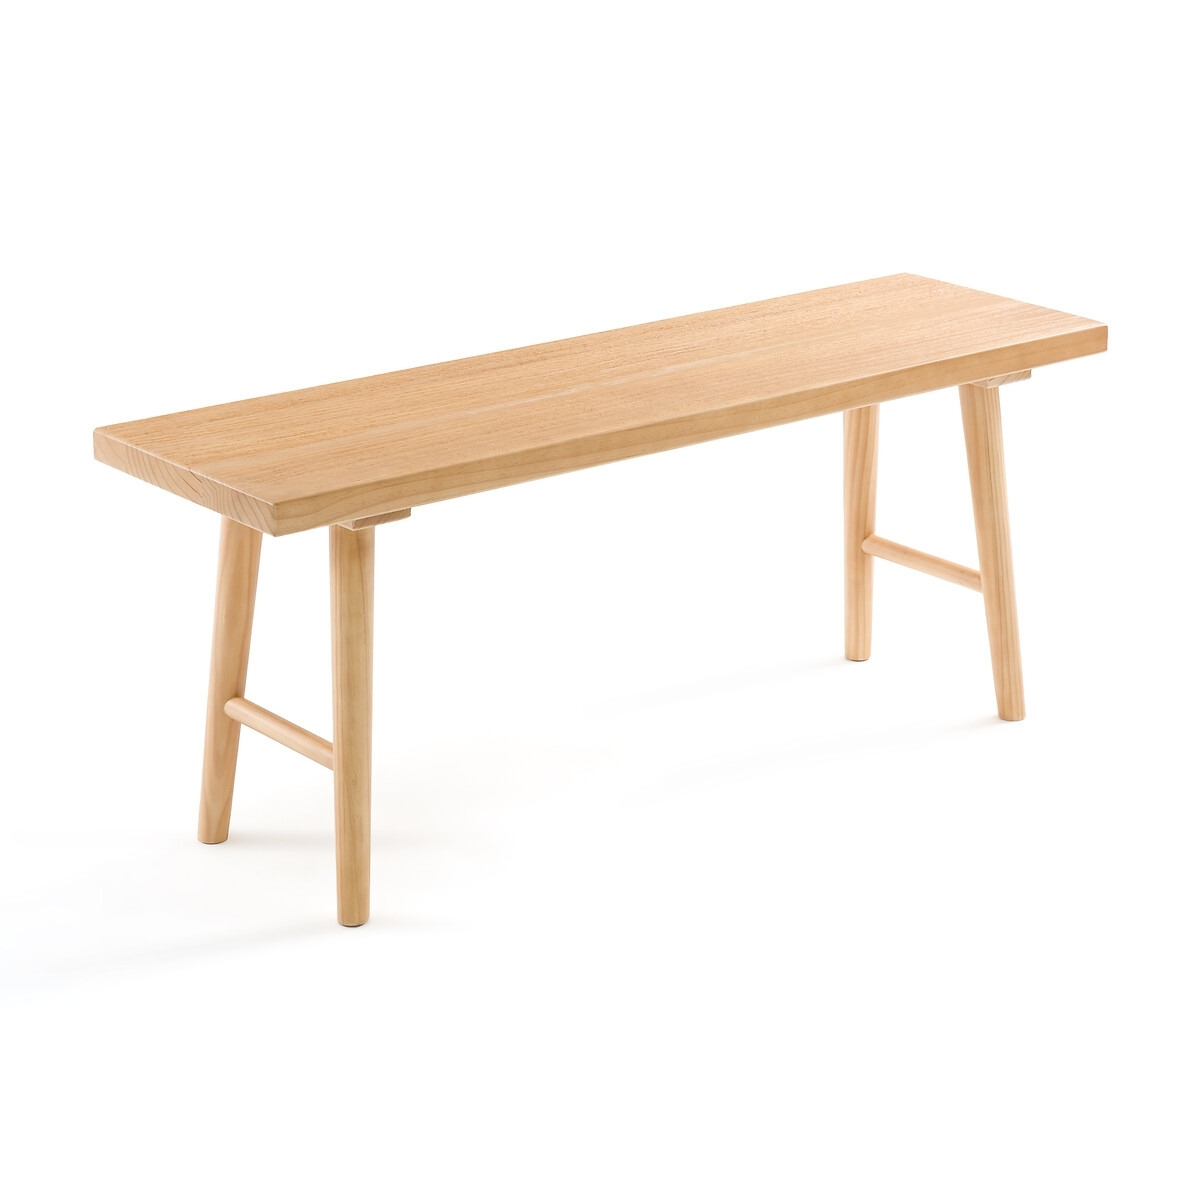 Paolo 110cm Solid Pine Table - image 1